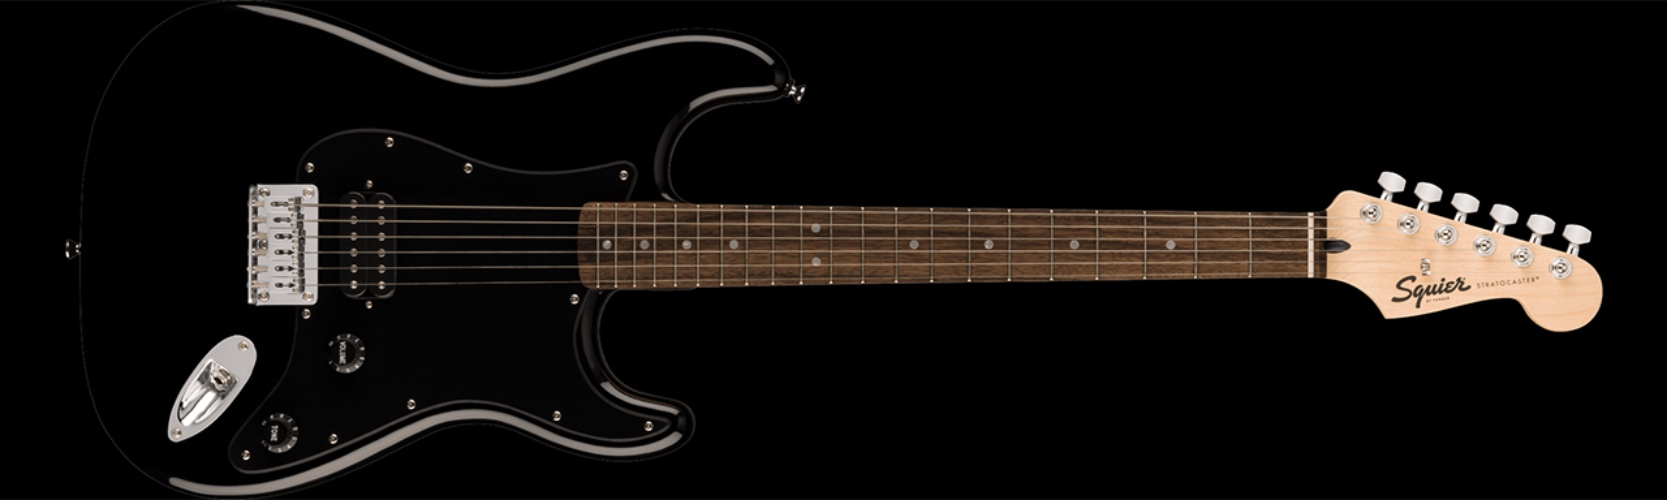 Squier-affinity-stratocaster-H-HT-Black-body